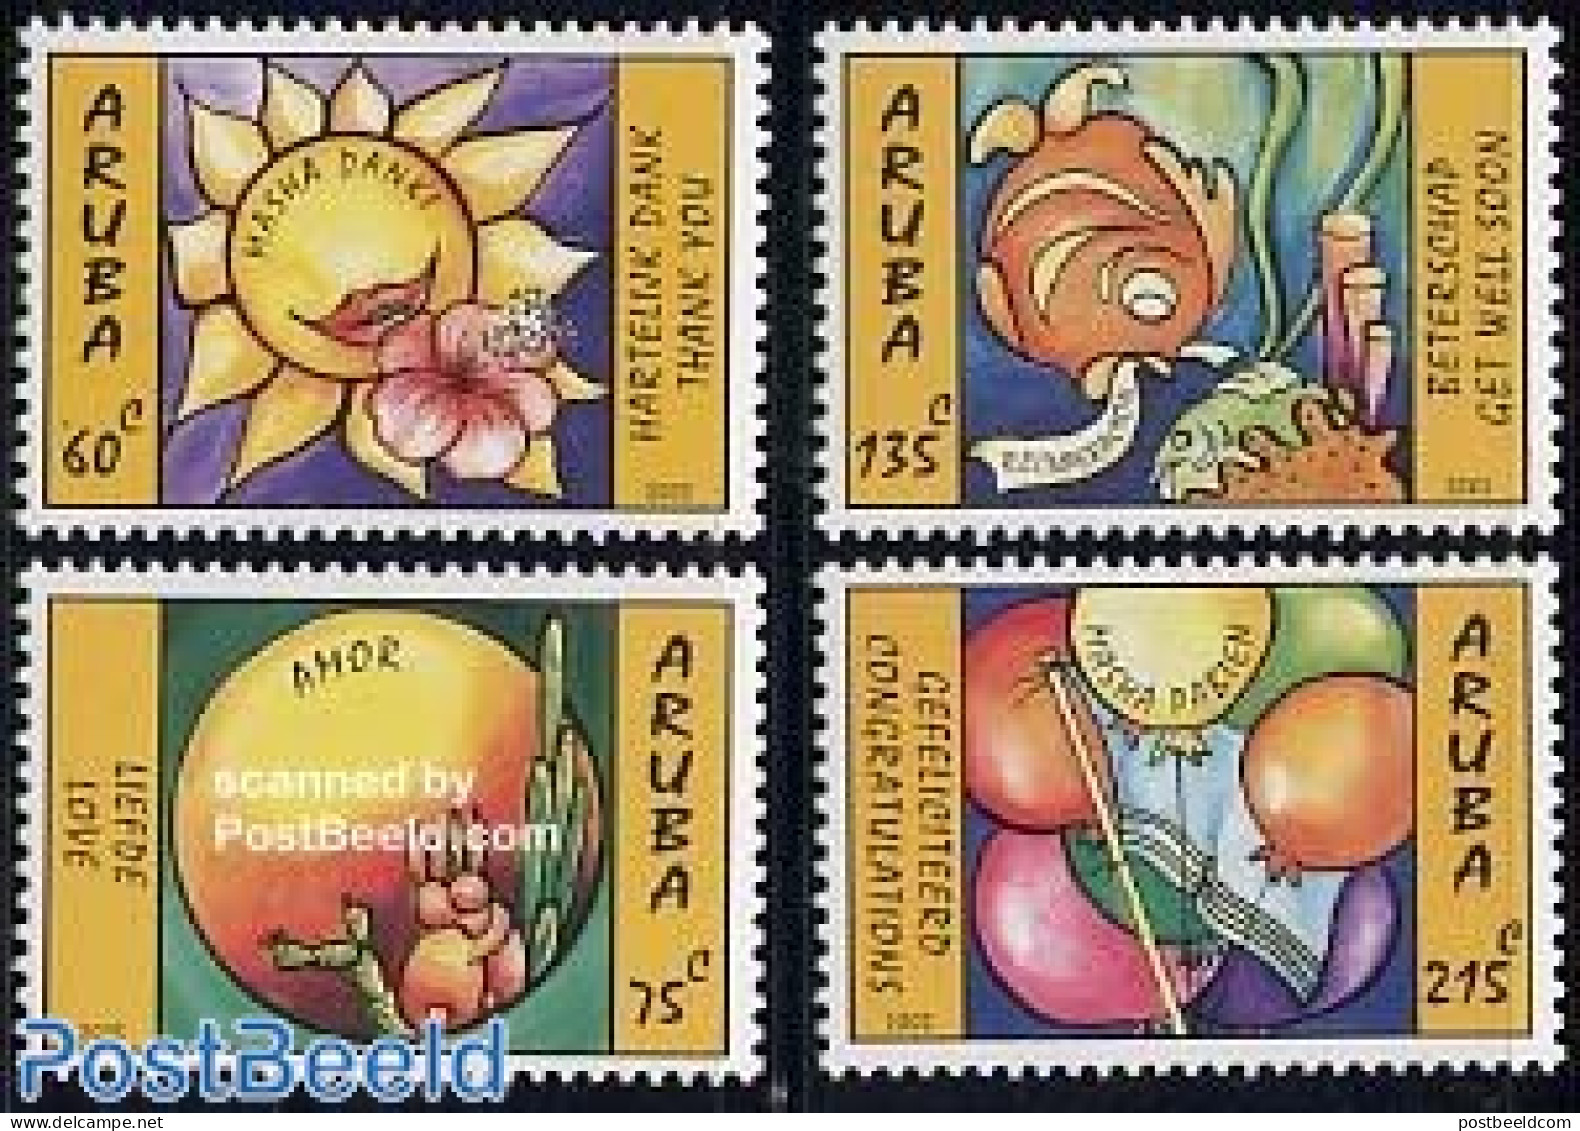 Aruba 2005 Wishing Stamps 4v, Mint NH, Nature - Various - Cacti - Fish - Flowers & Plants - Greetings & Wishing Stamps - Cactus